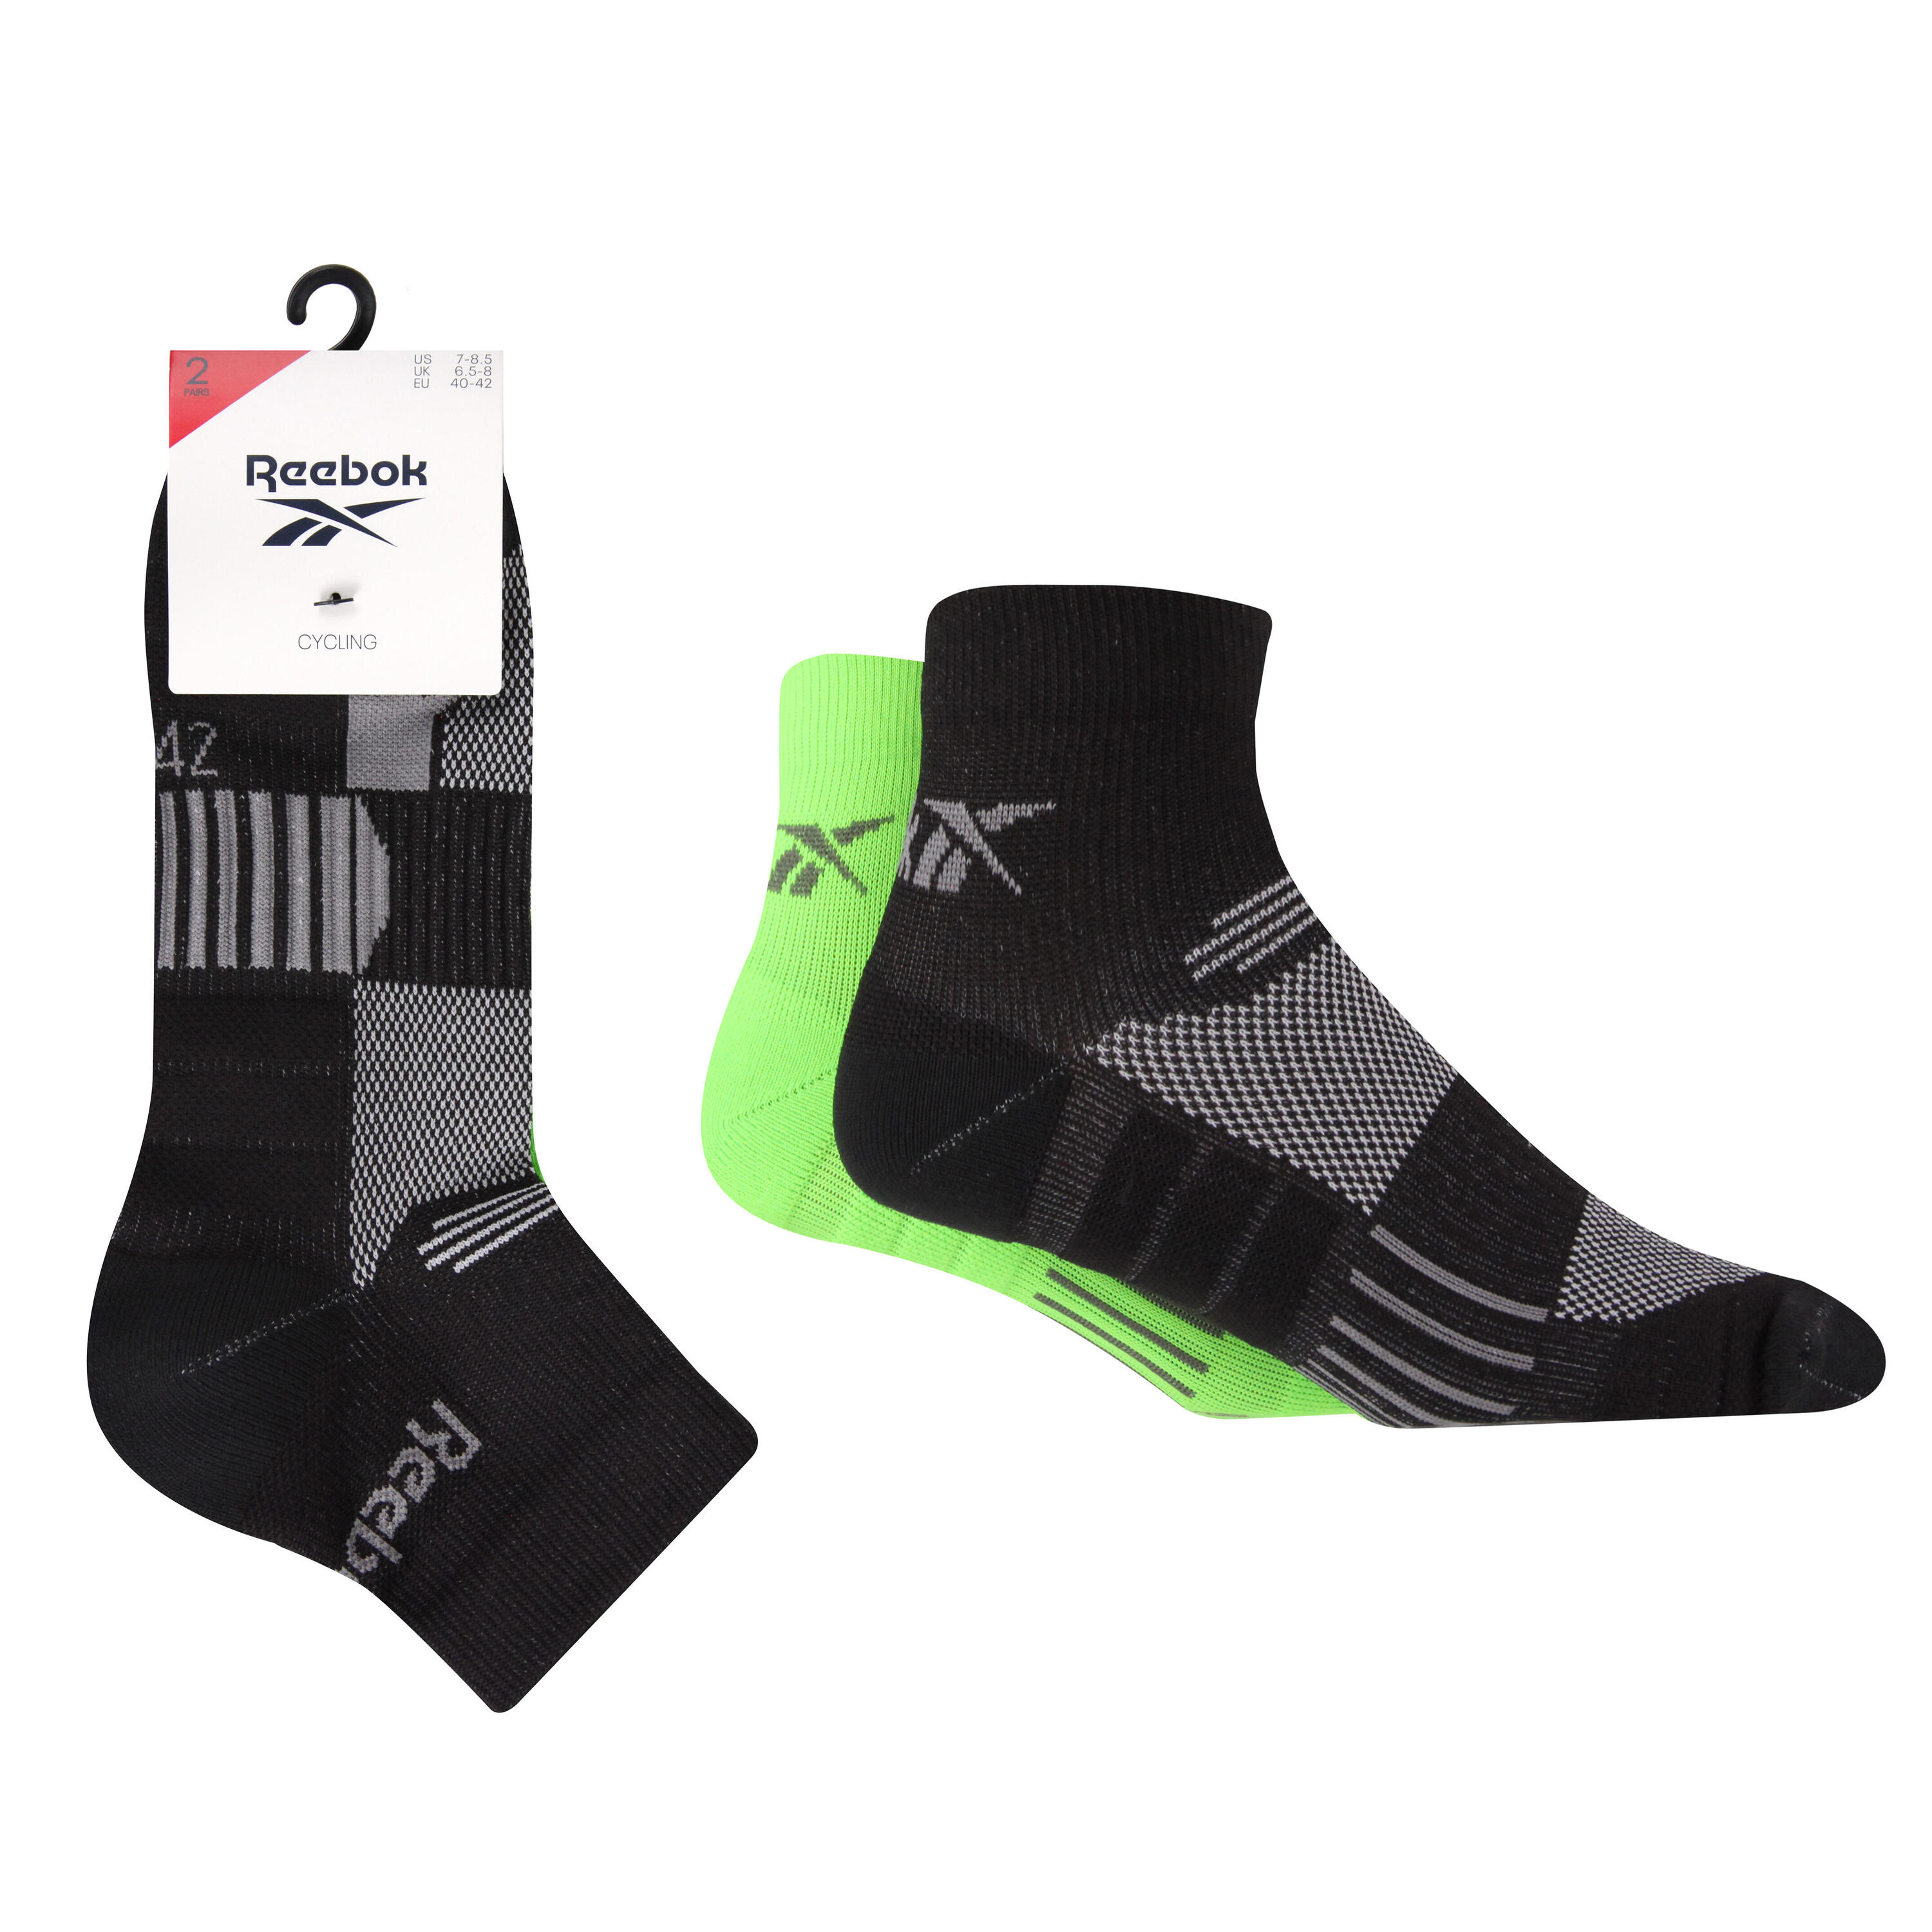 REEBOK 2 Pair Pack Cycling Socks With Full Elastic Compession and Arch Support